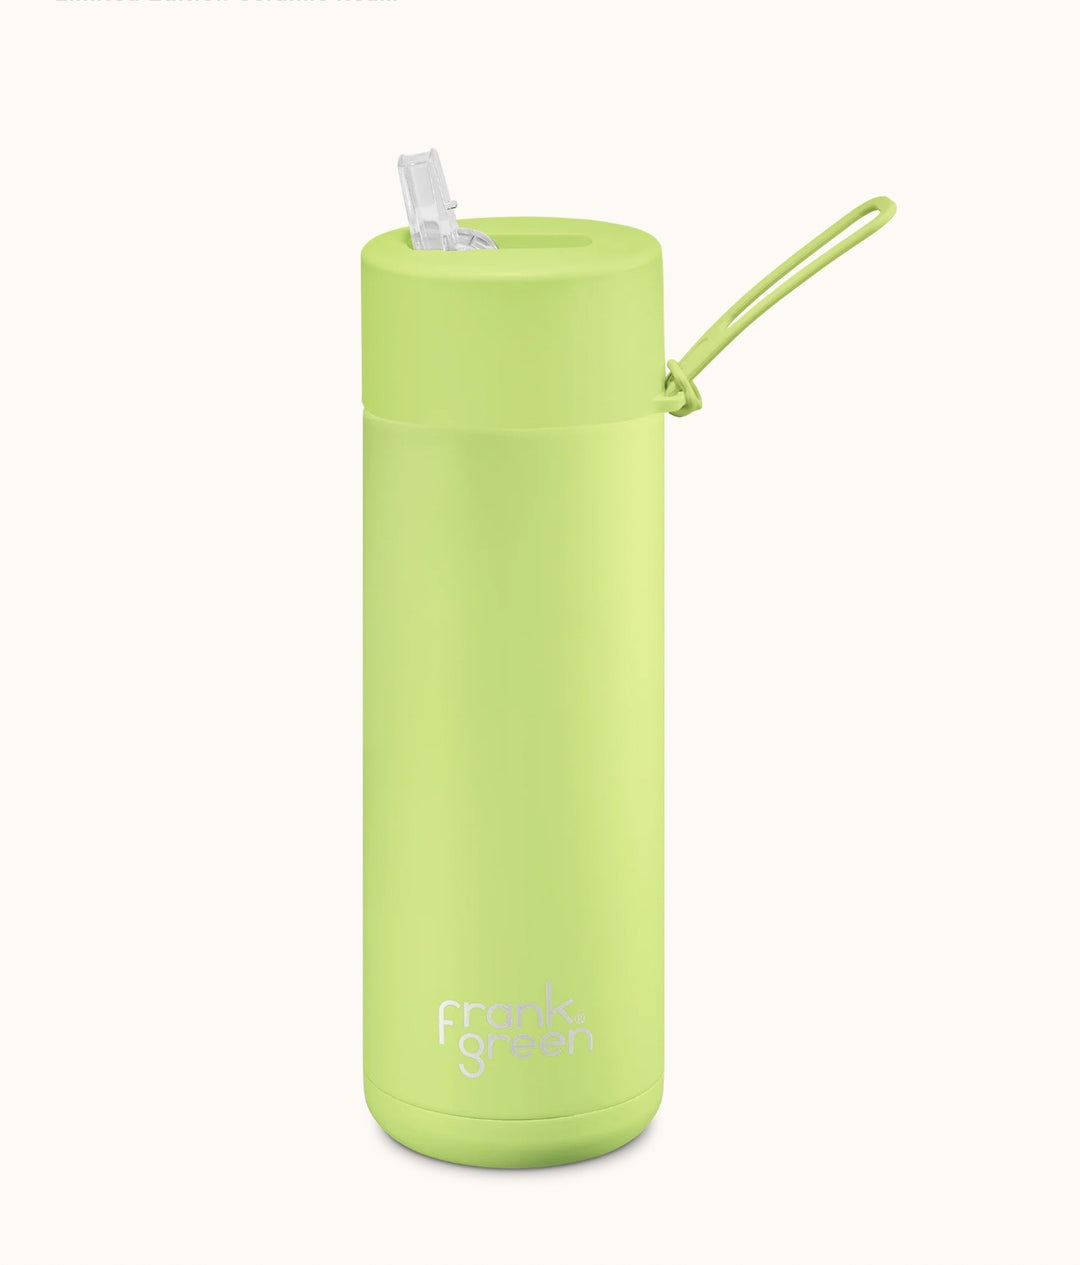 Limited Edition 20oz Stainless Steel Ceramic Reusable Bottle Pistachio Green  with Straw Lid Hull Drink Bottles Frank Green   